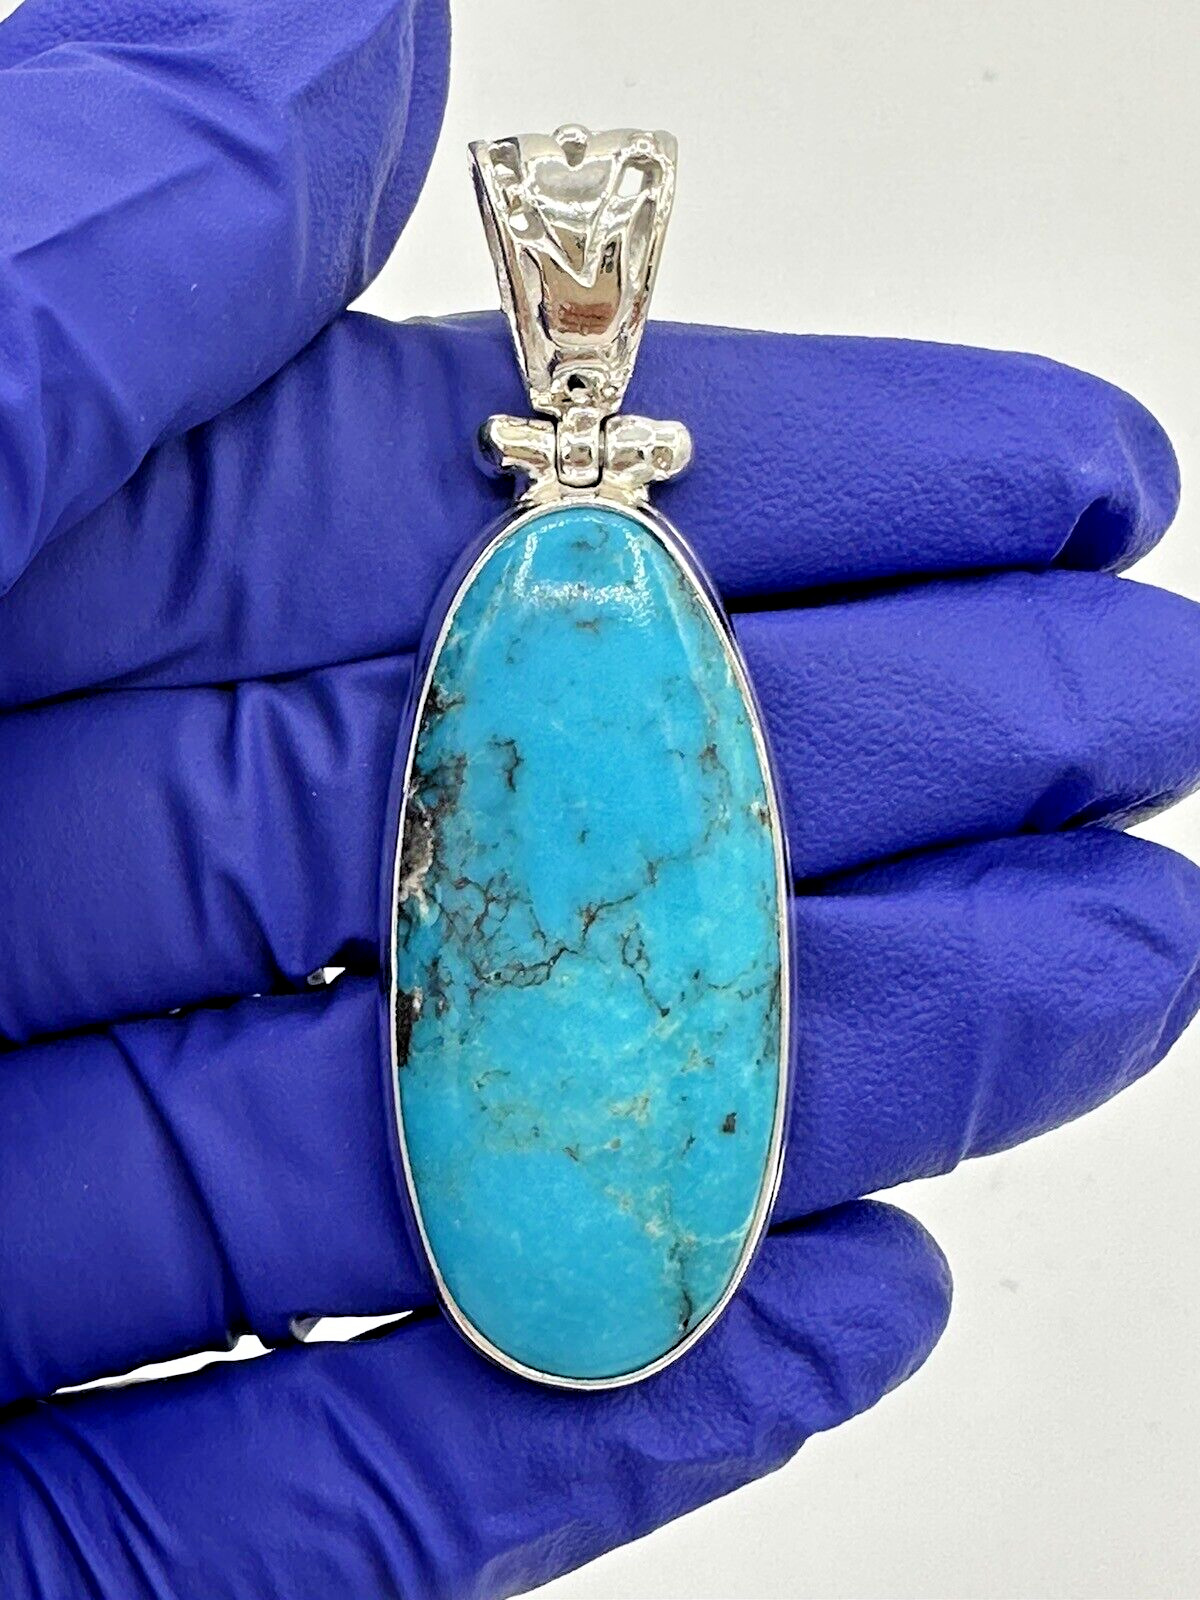 Unique Solid Sterling Silver 925 Long Oval Blue Turquoise Pendant 2.4”